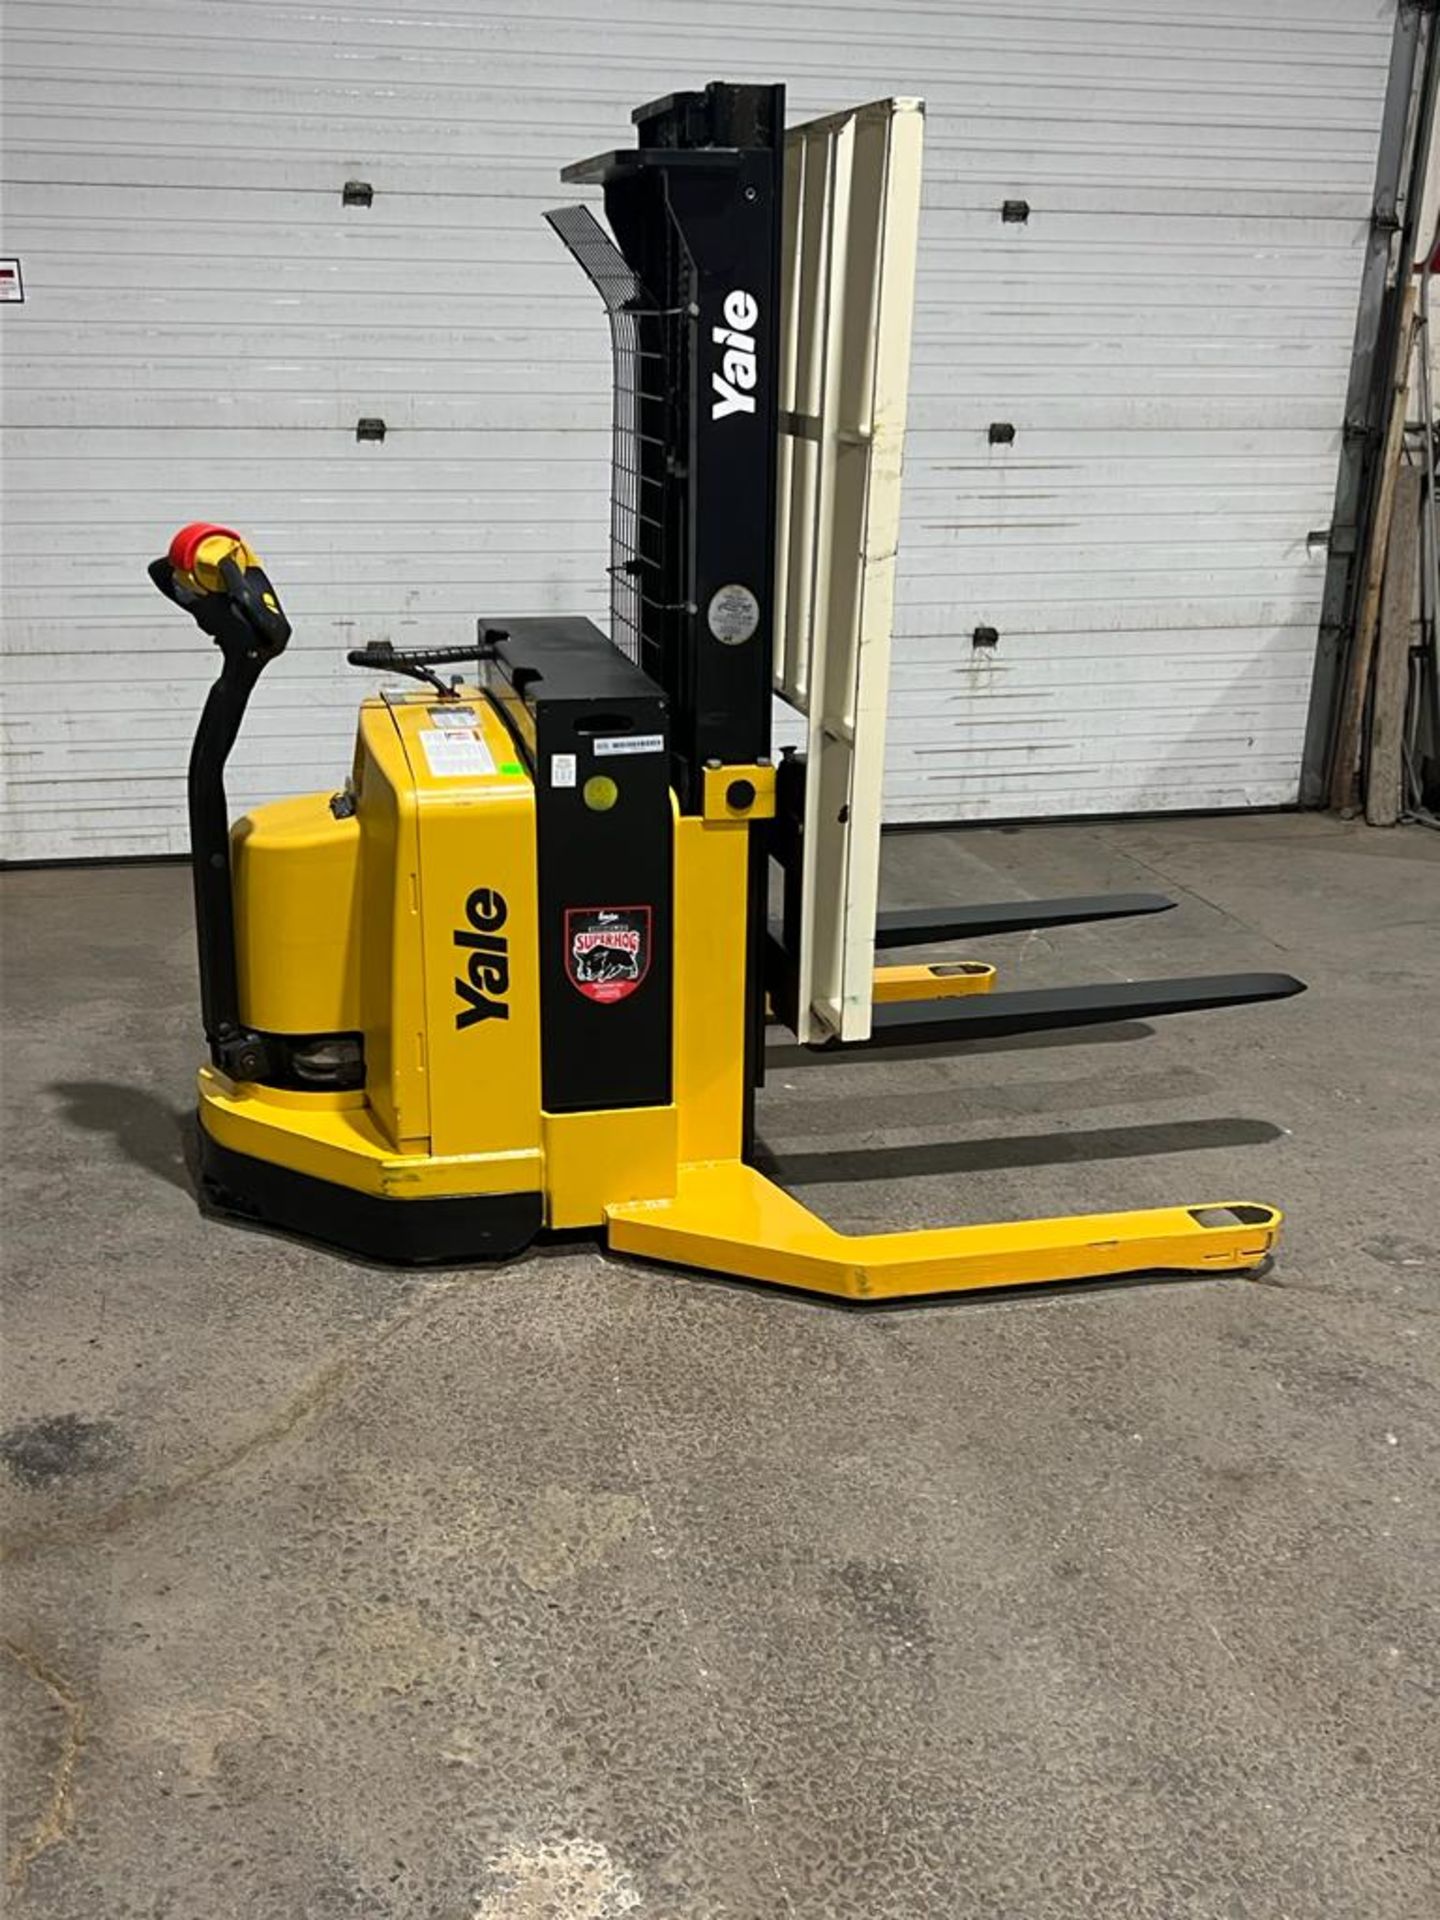 2011 Yale Pallet Stacker Walk Behind 4,000lbs capacity 3-Stage Mast electric Powered Pallet Cart 24V